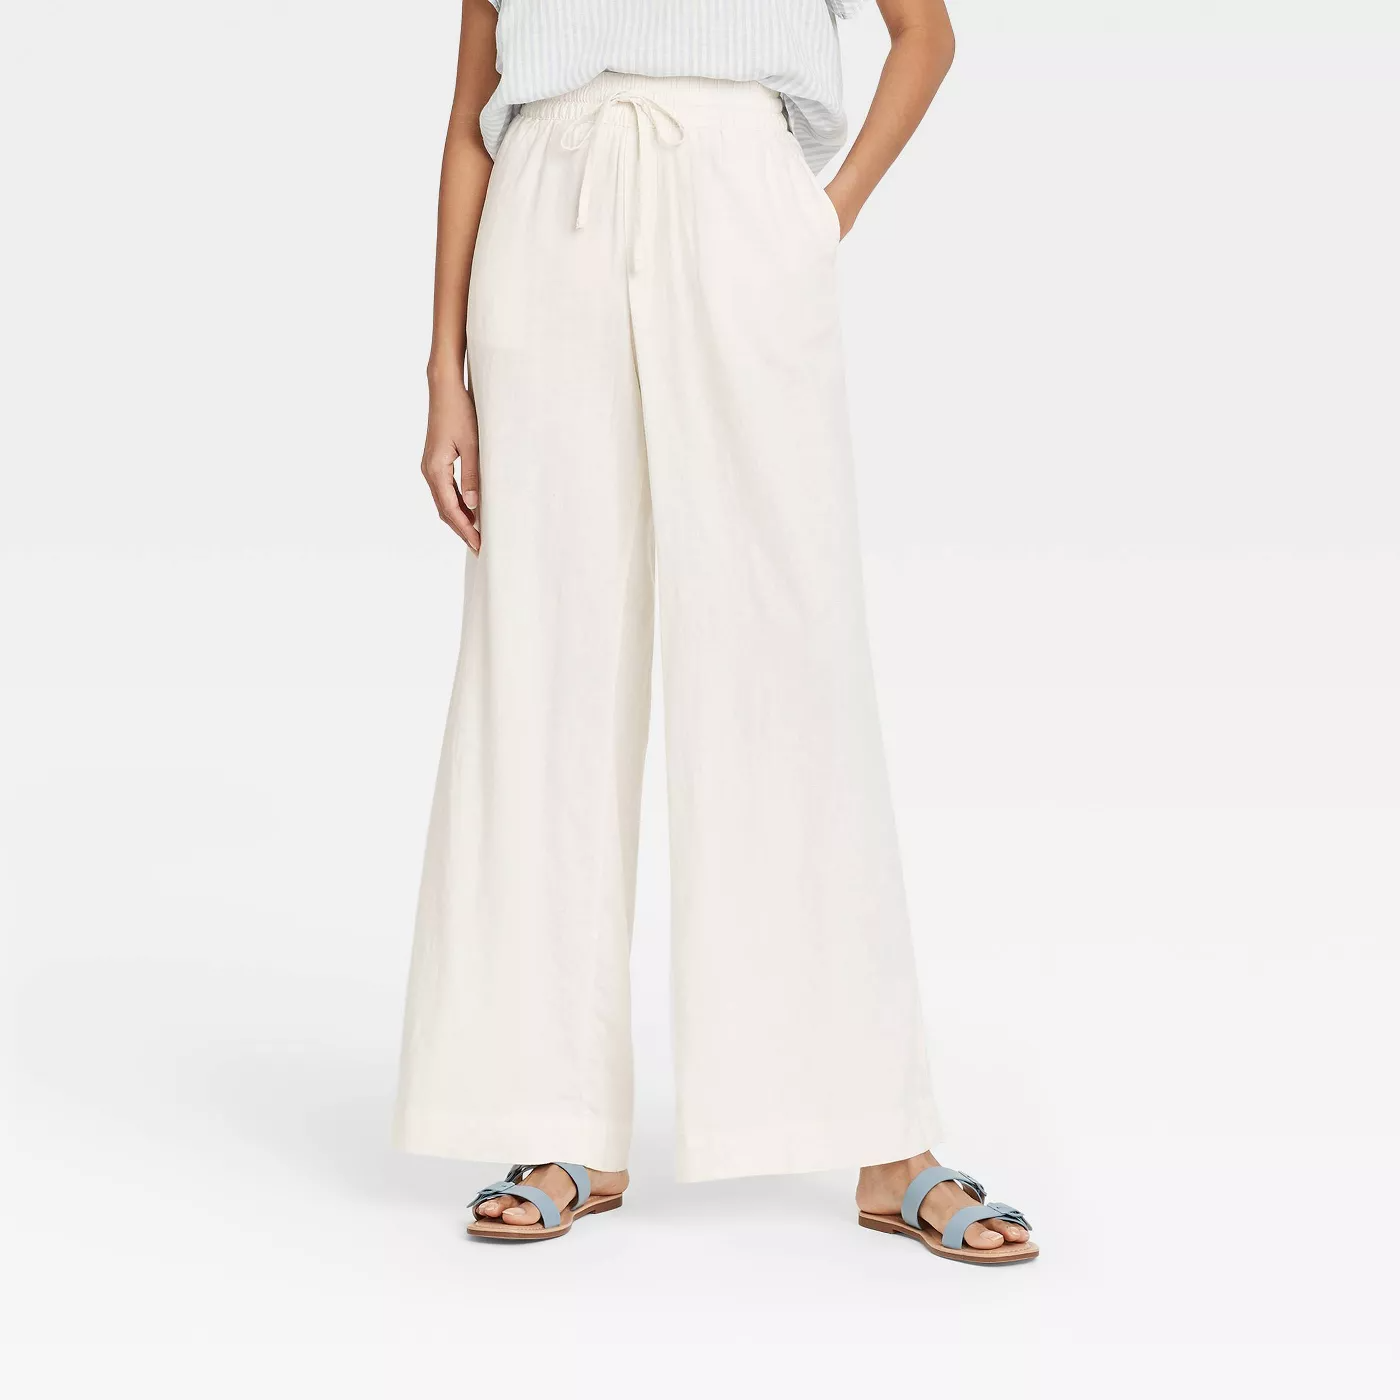 A New Day + Mid-Rise Relaxed Fit Pants